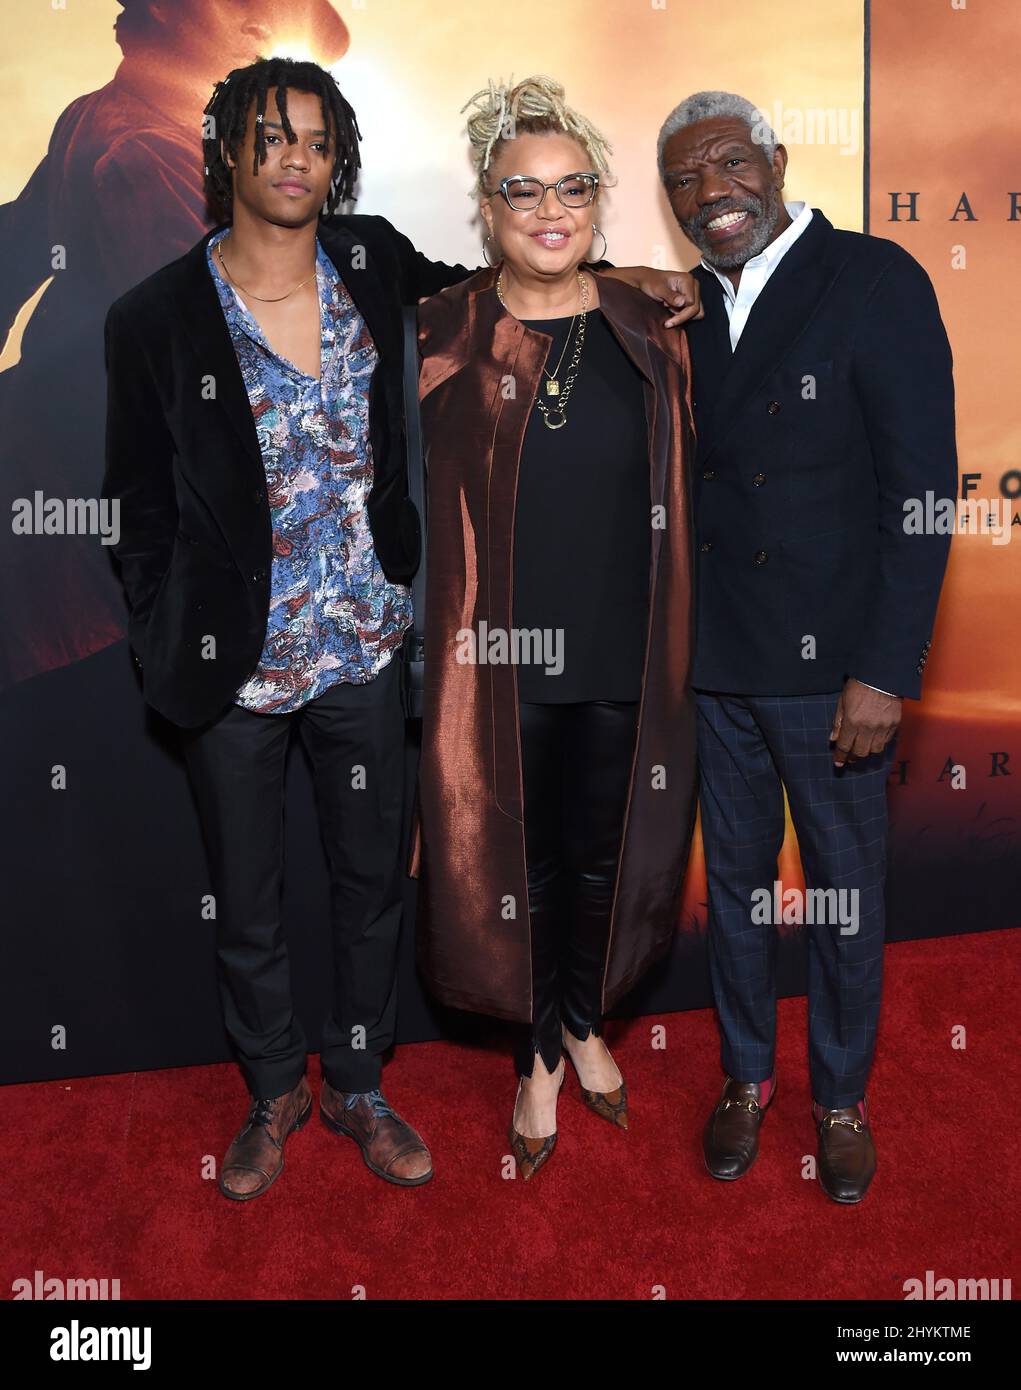 Henry Hunter Hall, Kasi Lemmons and Vondie Curtis Hall arriving to the €˜Harriet Los Angeles Premiere at Orpheum Theatre on October 29, 2019 in Los Angeles, USA. Stock Photo